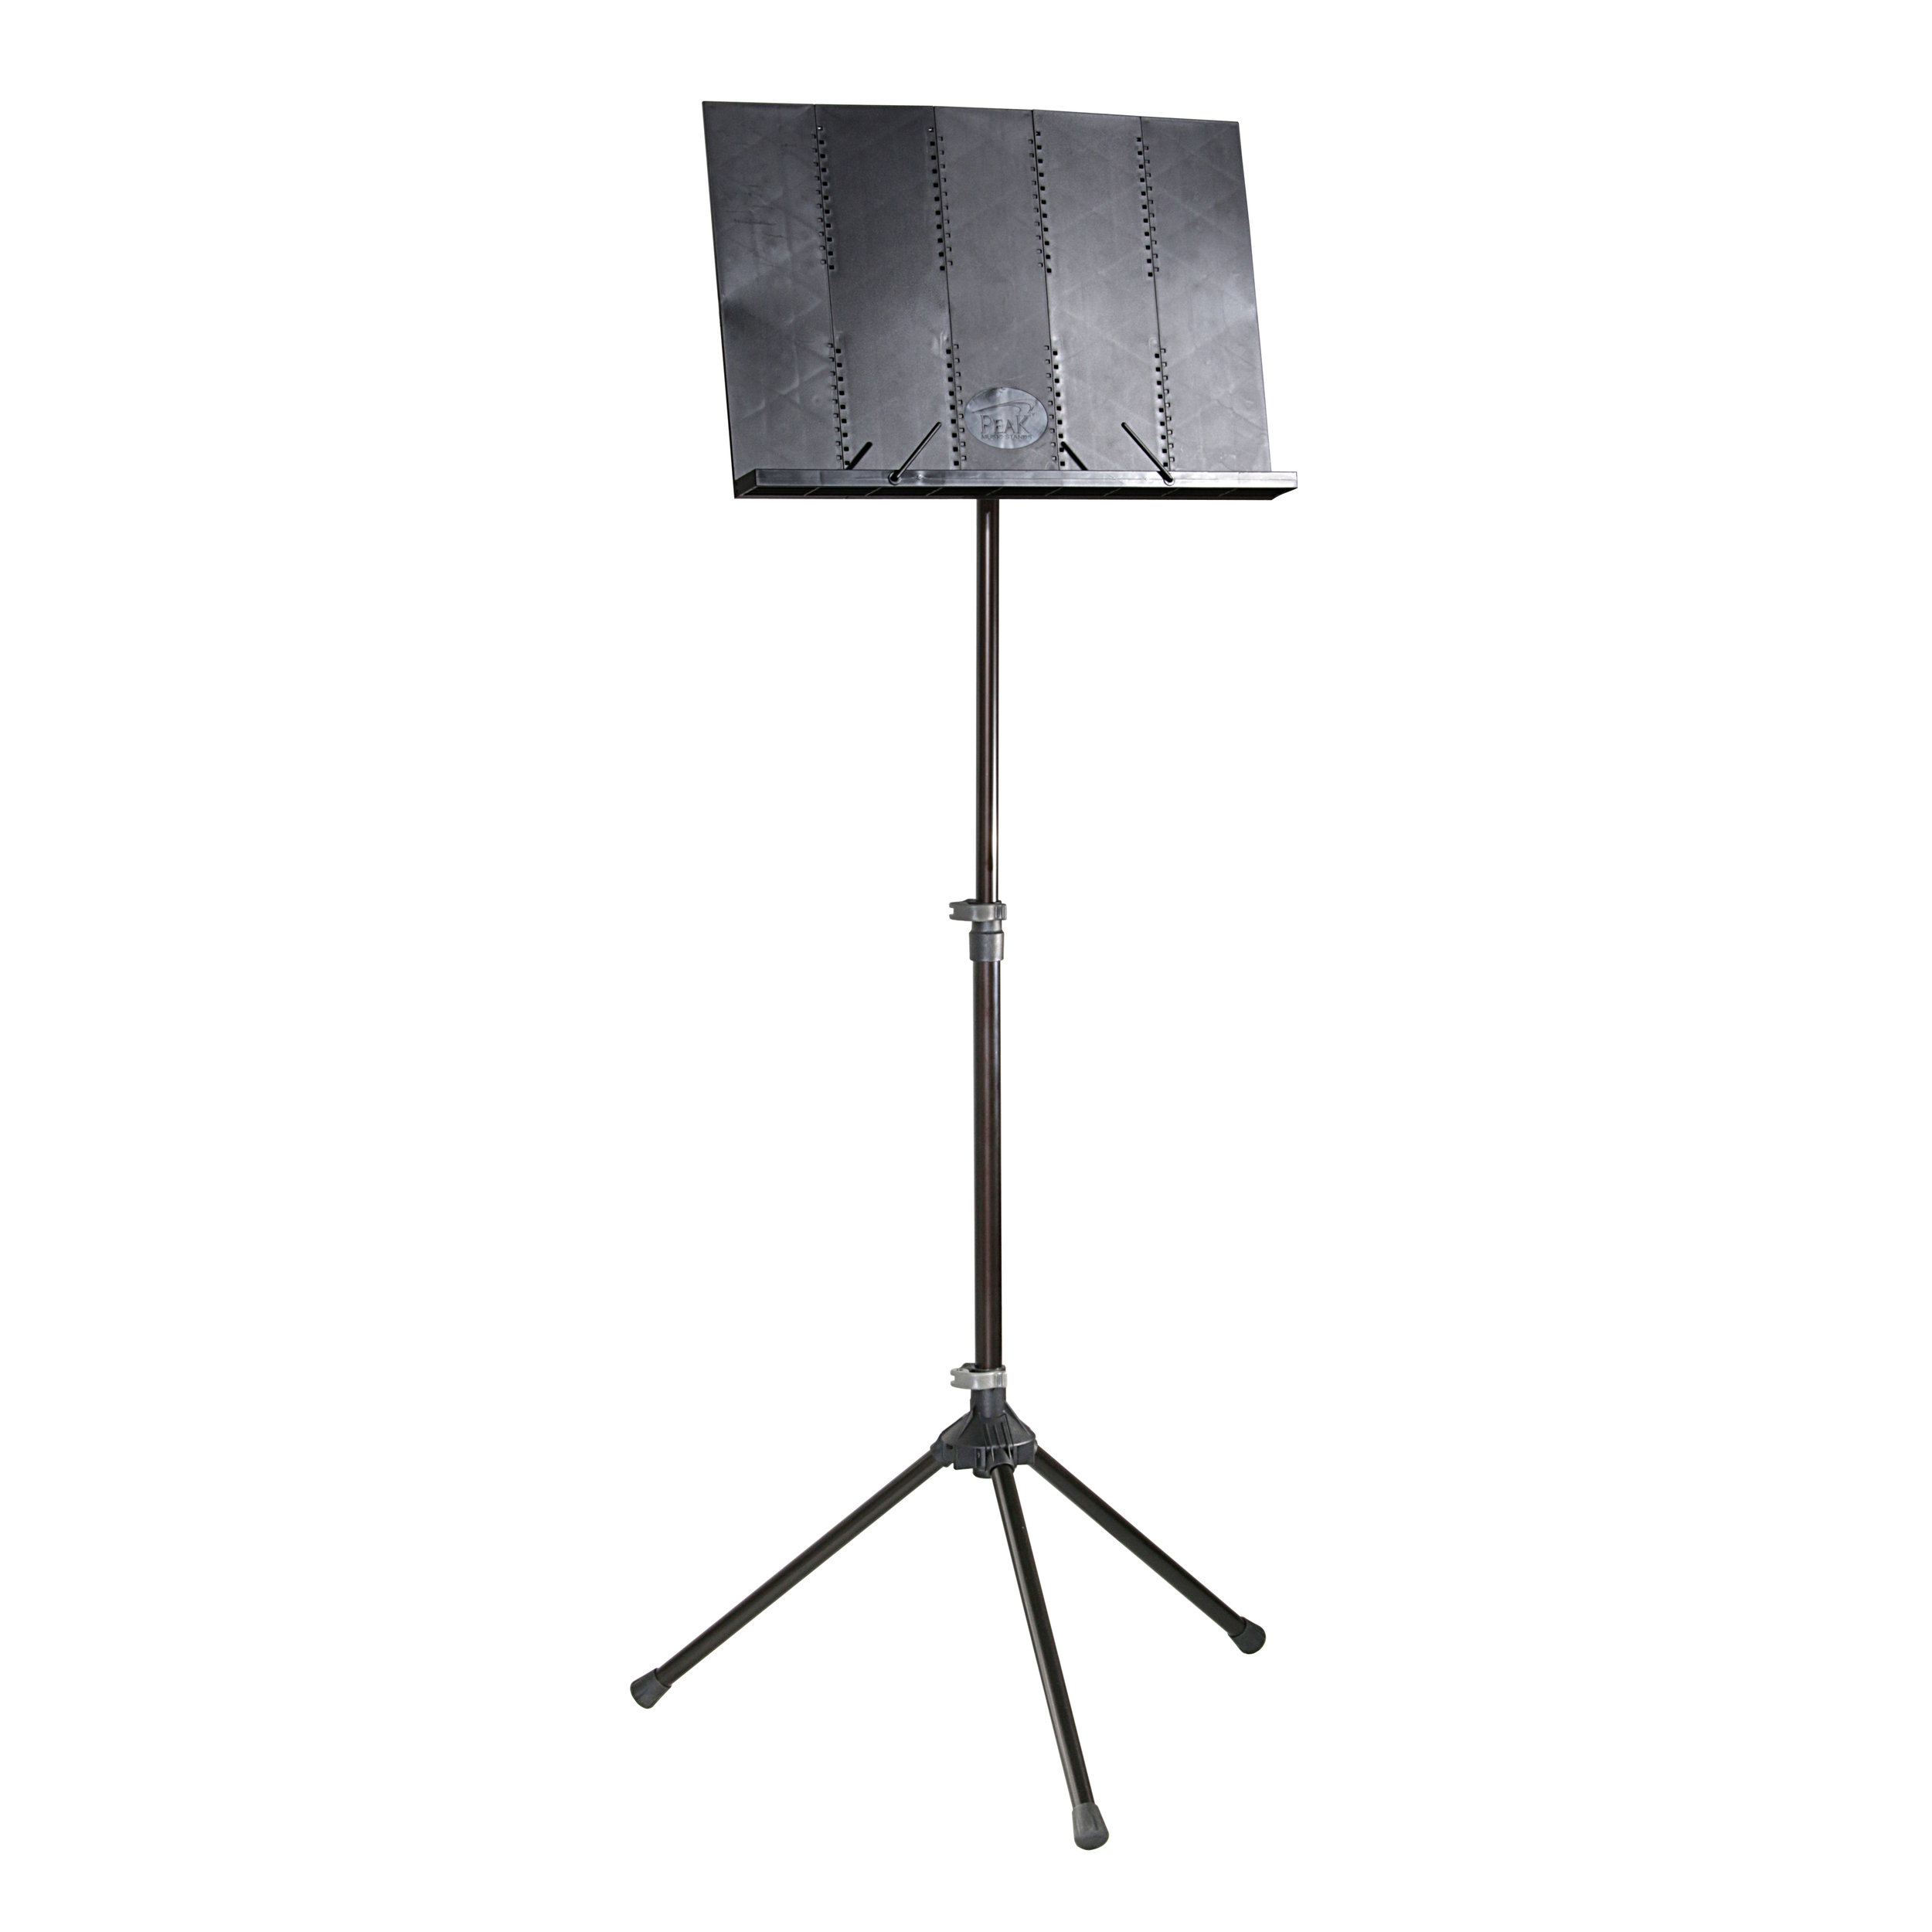 SMS-40 Collapsible Music Stand — Peak Stands-The Best Portable Stands